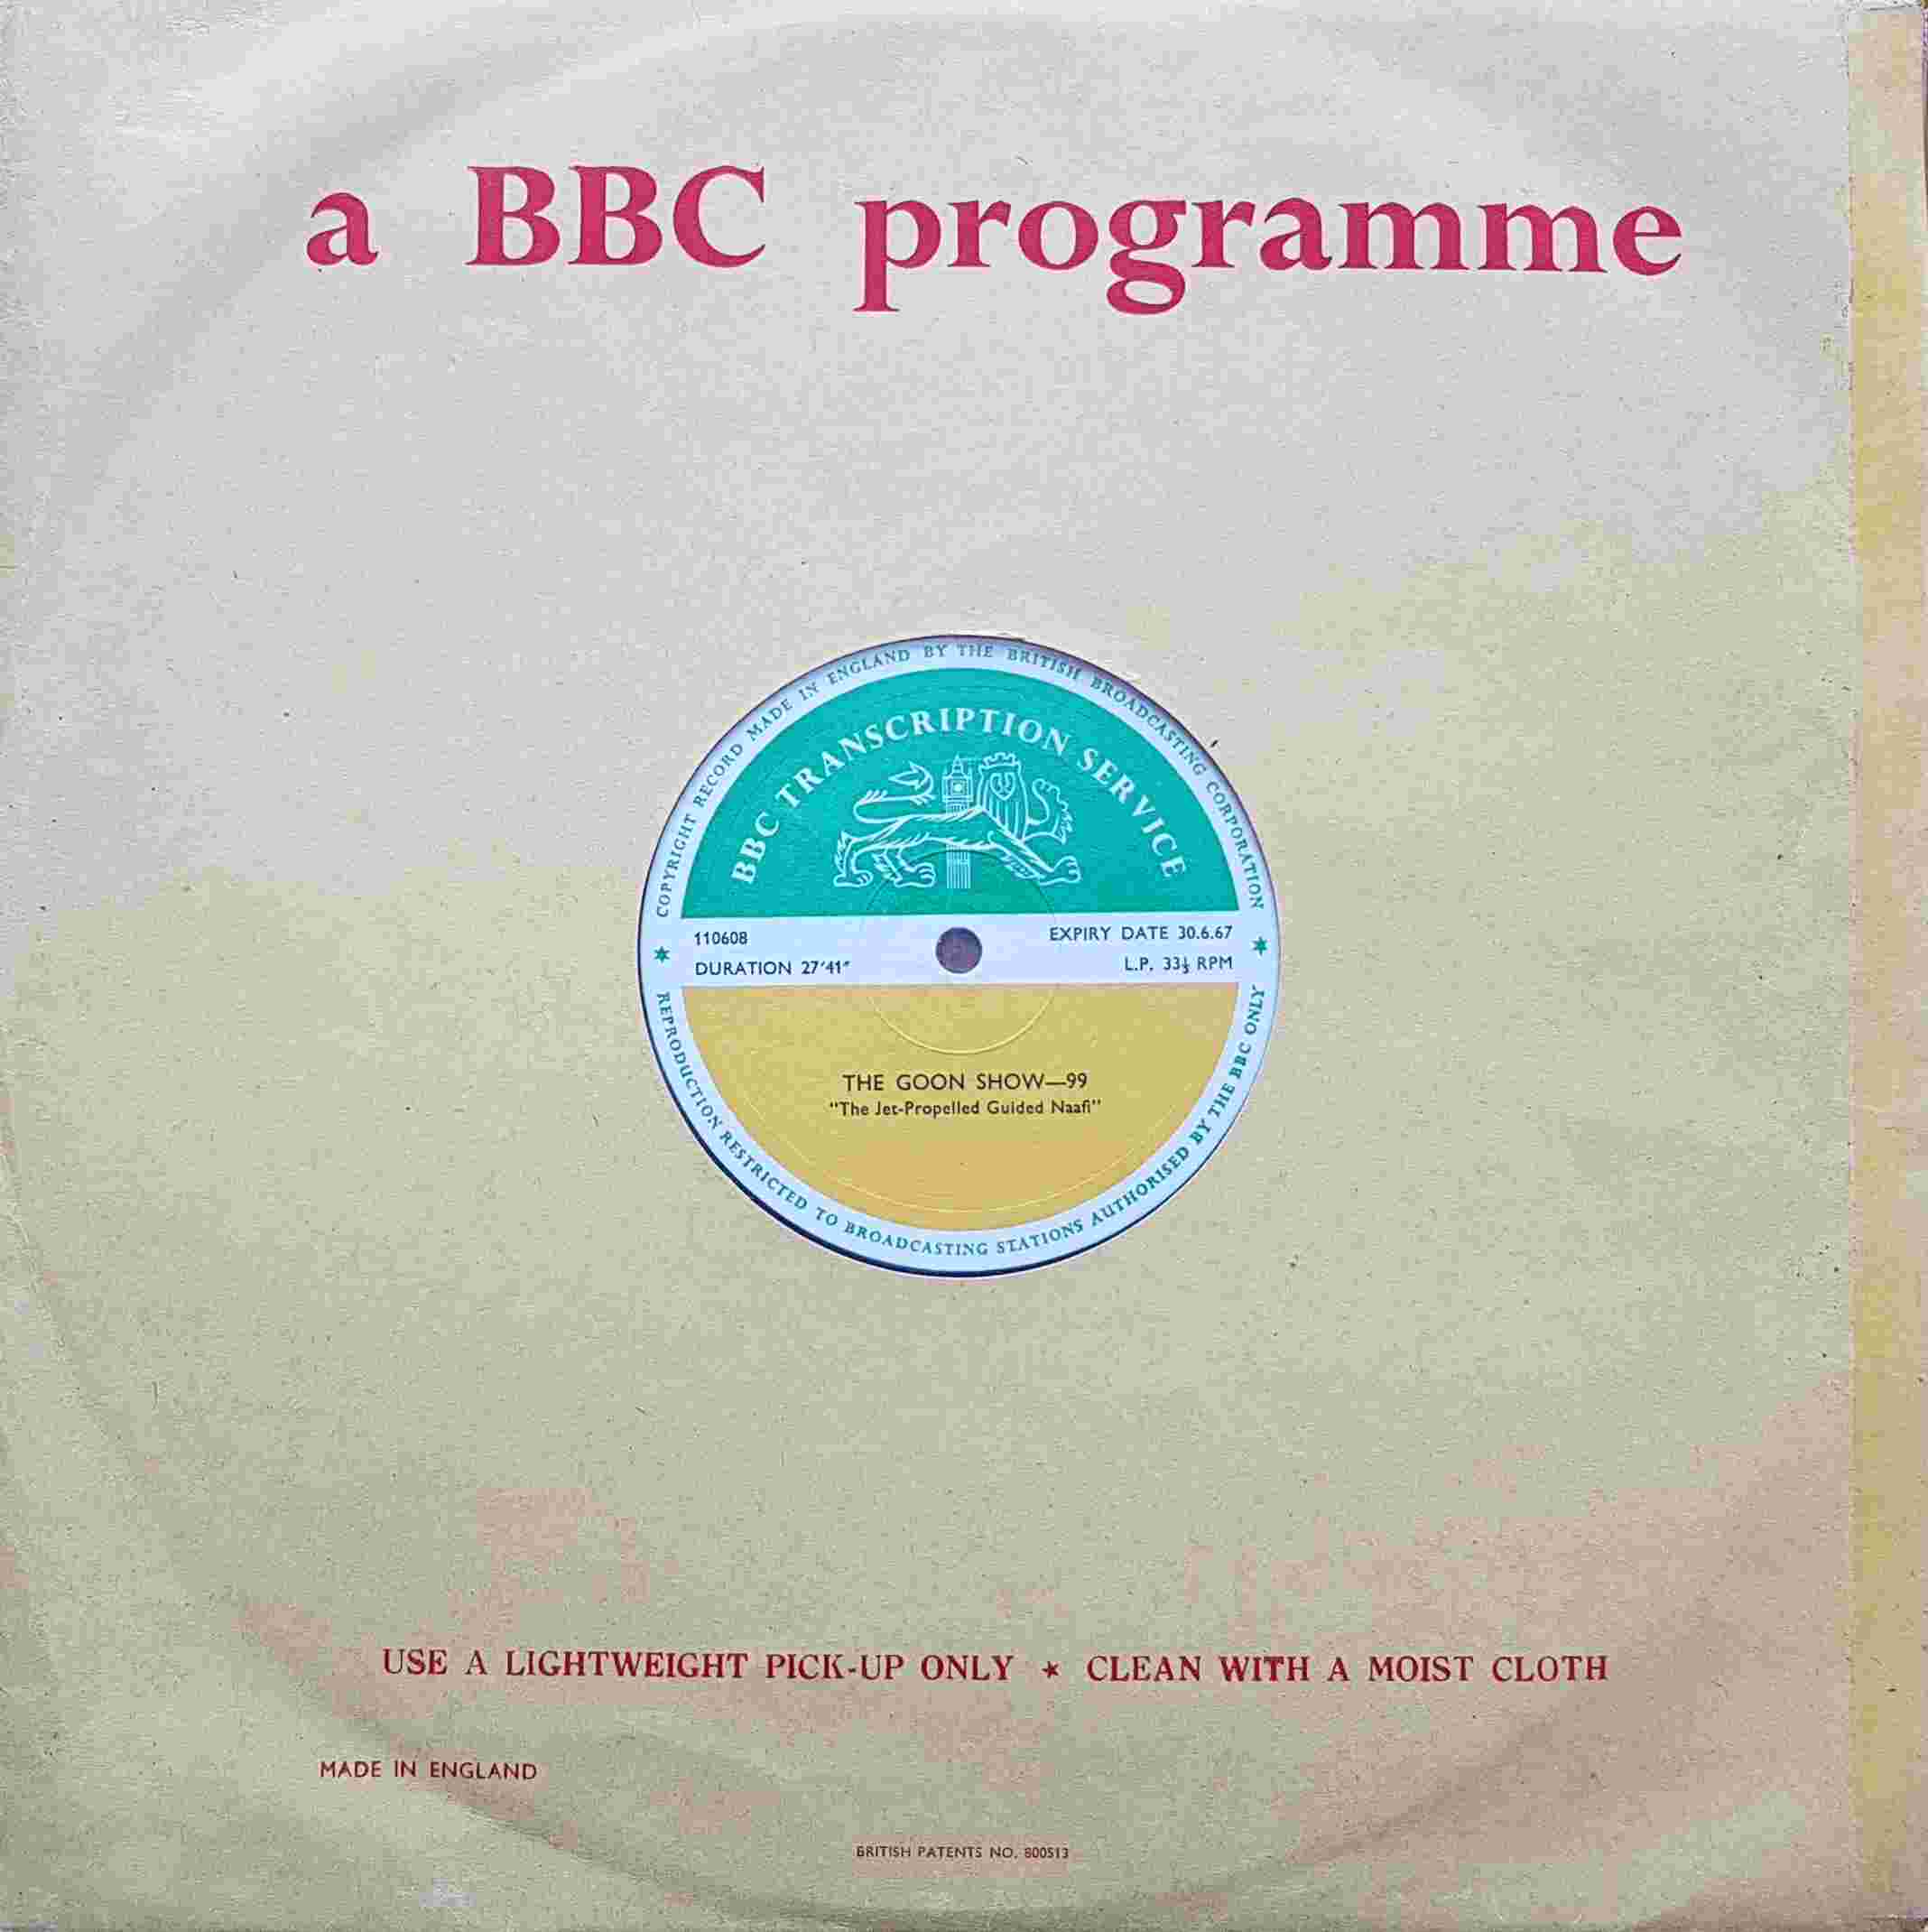 Picture of 110608 The Goon show - 99 & 100 by artist Spike Milligan / Larry Stevens from the BBC albums - Records and Tapes library